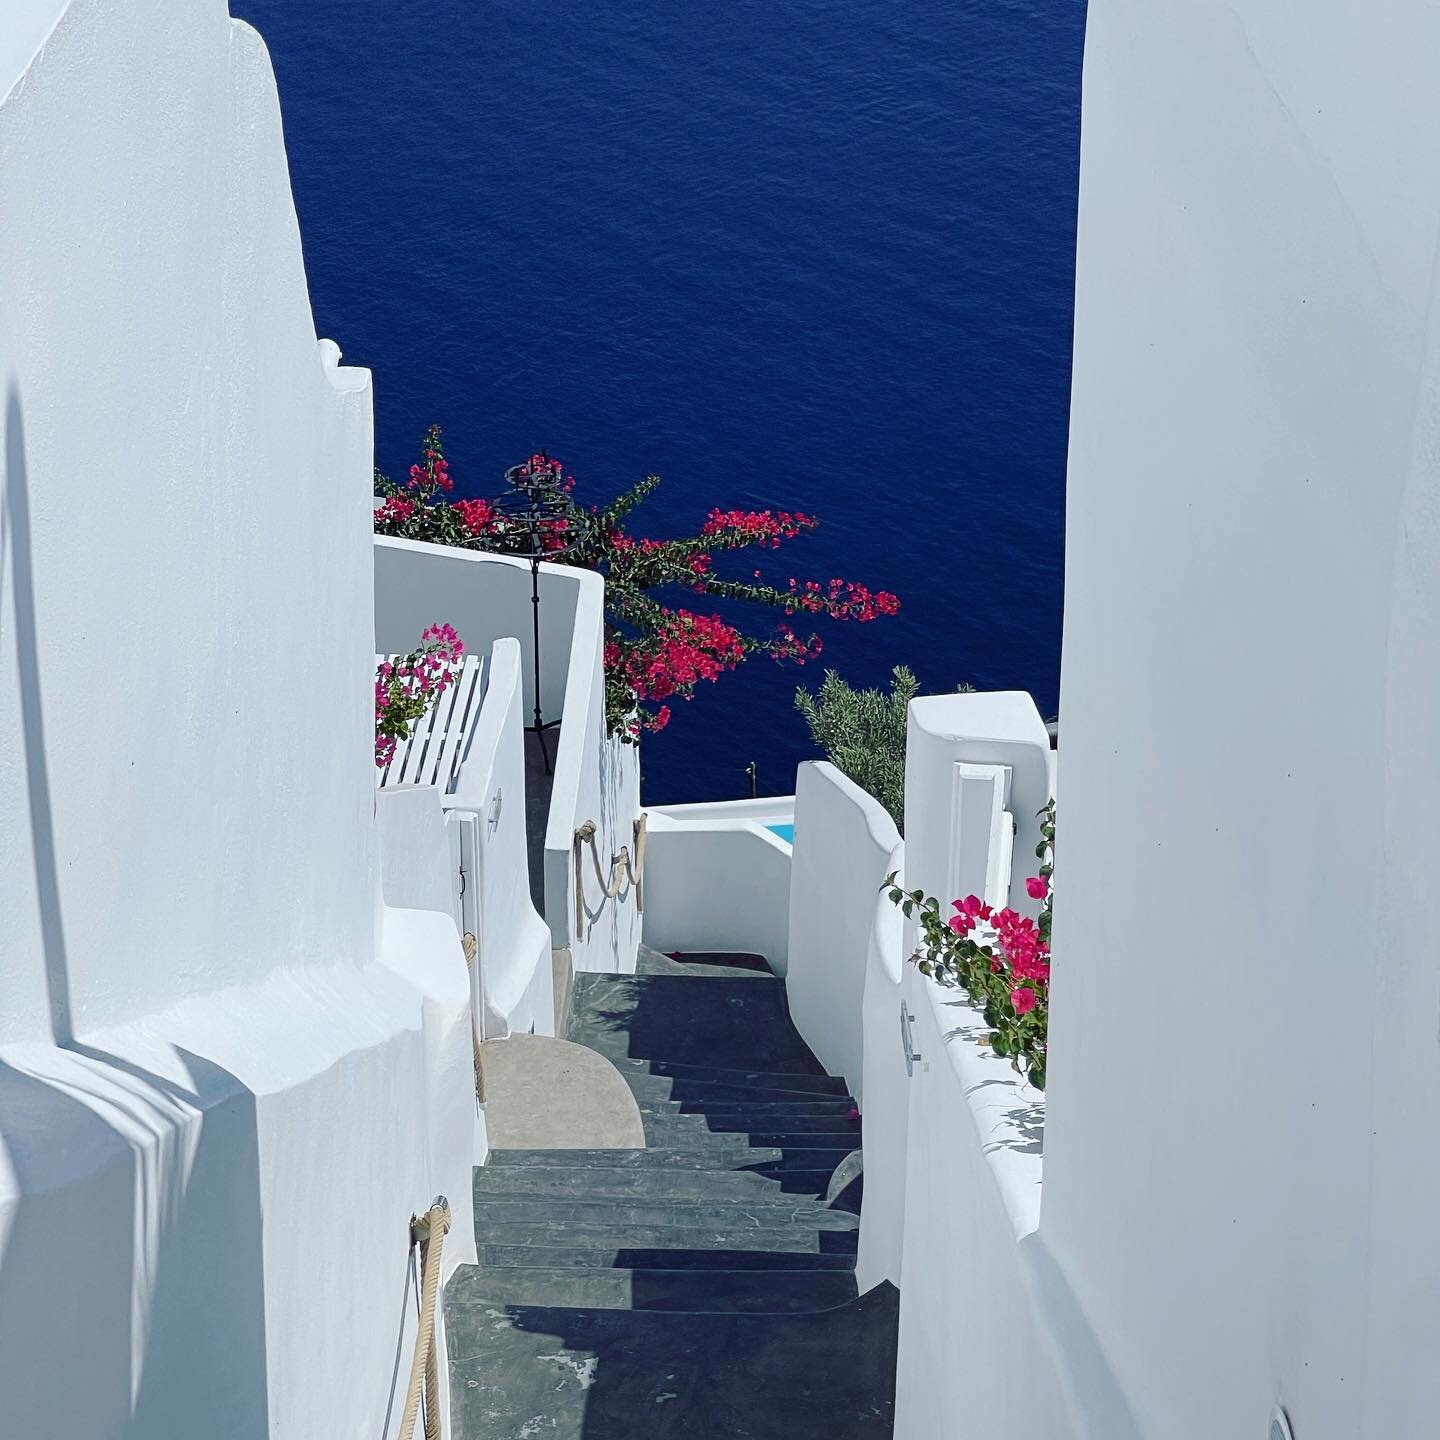 Santorini had some of the most breathtaking views and a theater that played Mamma Mia every night.